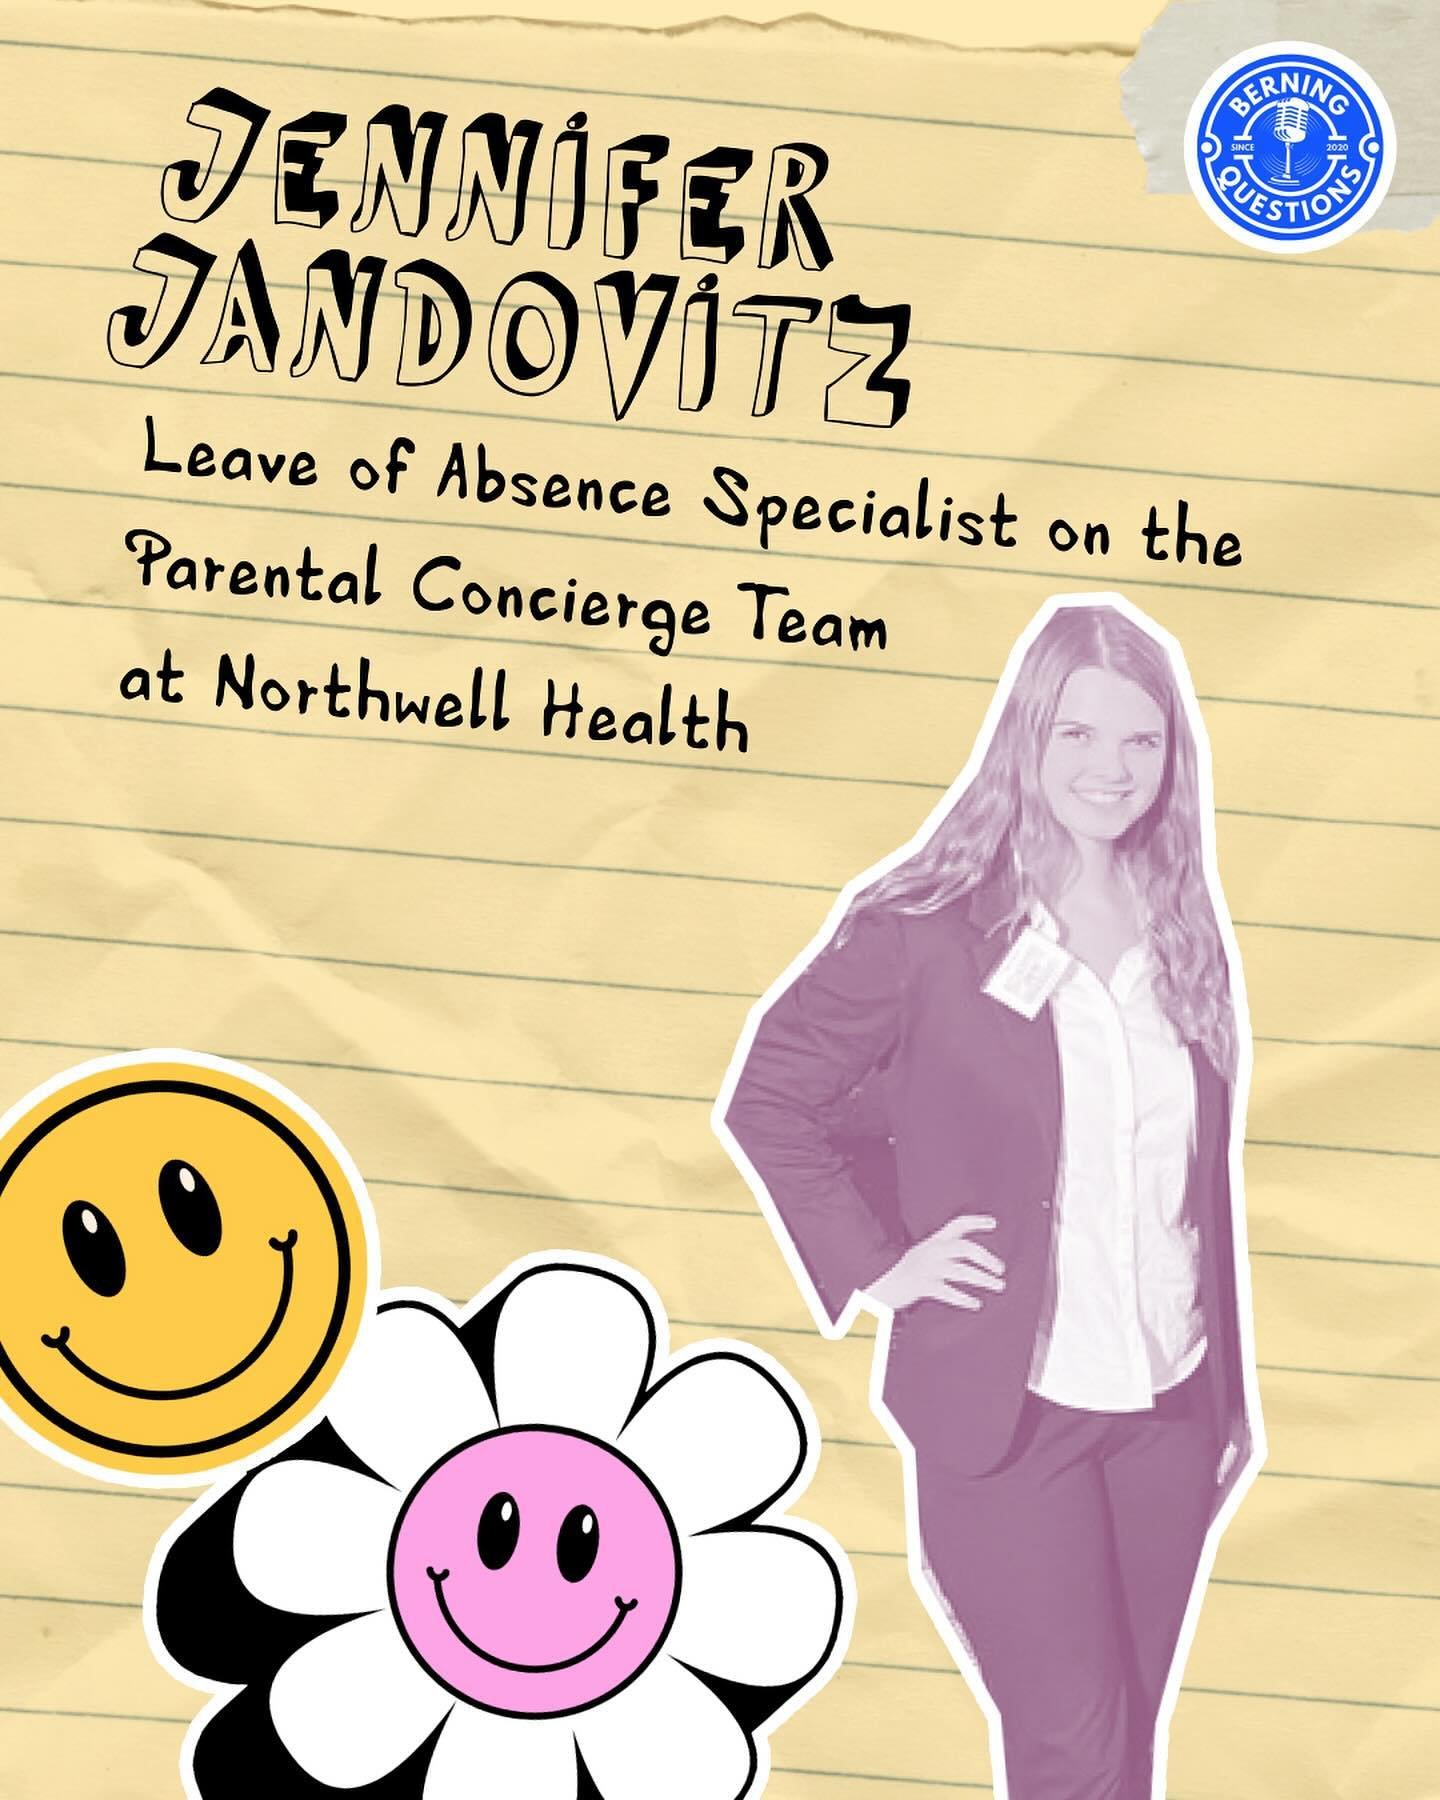 Interested in pursuing a career on a parental concierge team in the medical field? 👩🏻&zwj;⚕️

Meet Jen Jandovitz, leave of absence specialist on the Parental Concierge Team at Northwell Health. 

Whether it&rsquo;s in your words or ours, Berning Qu